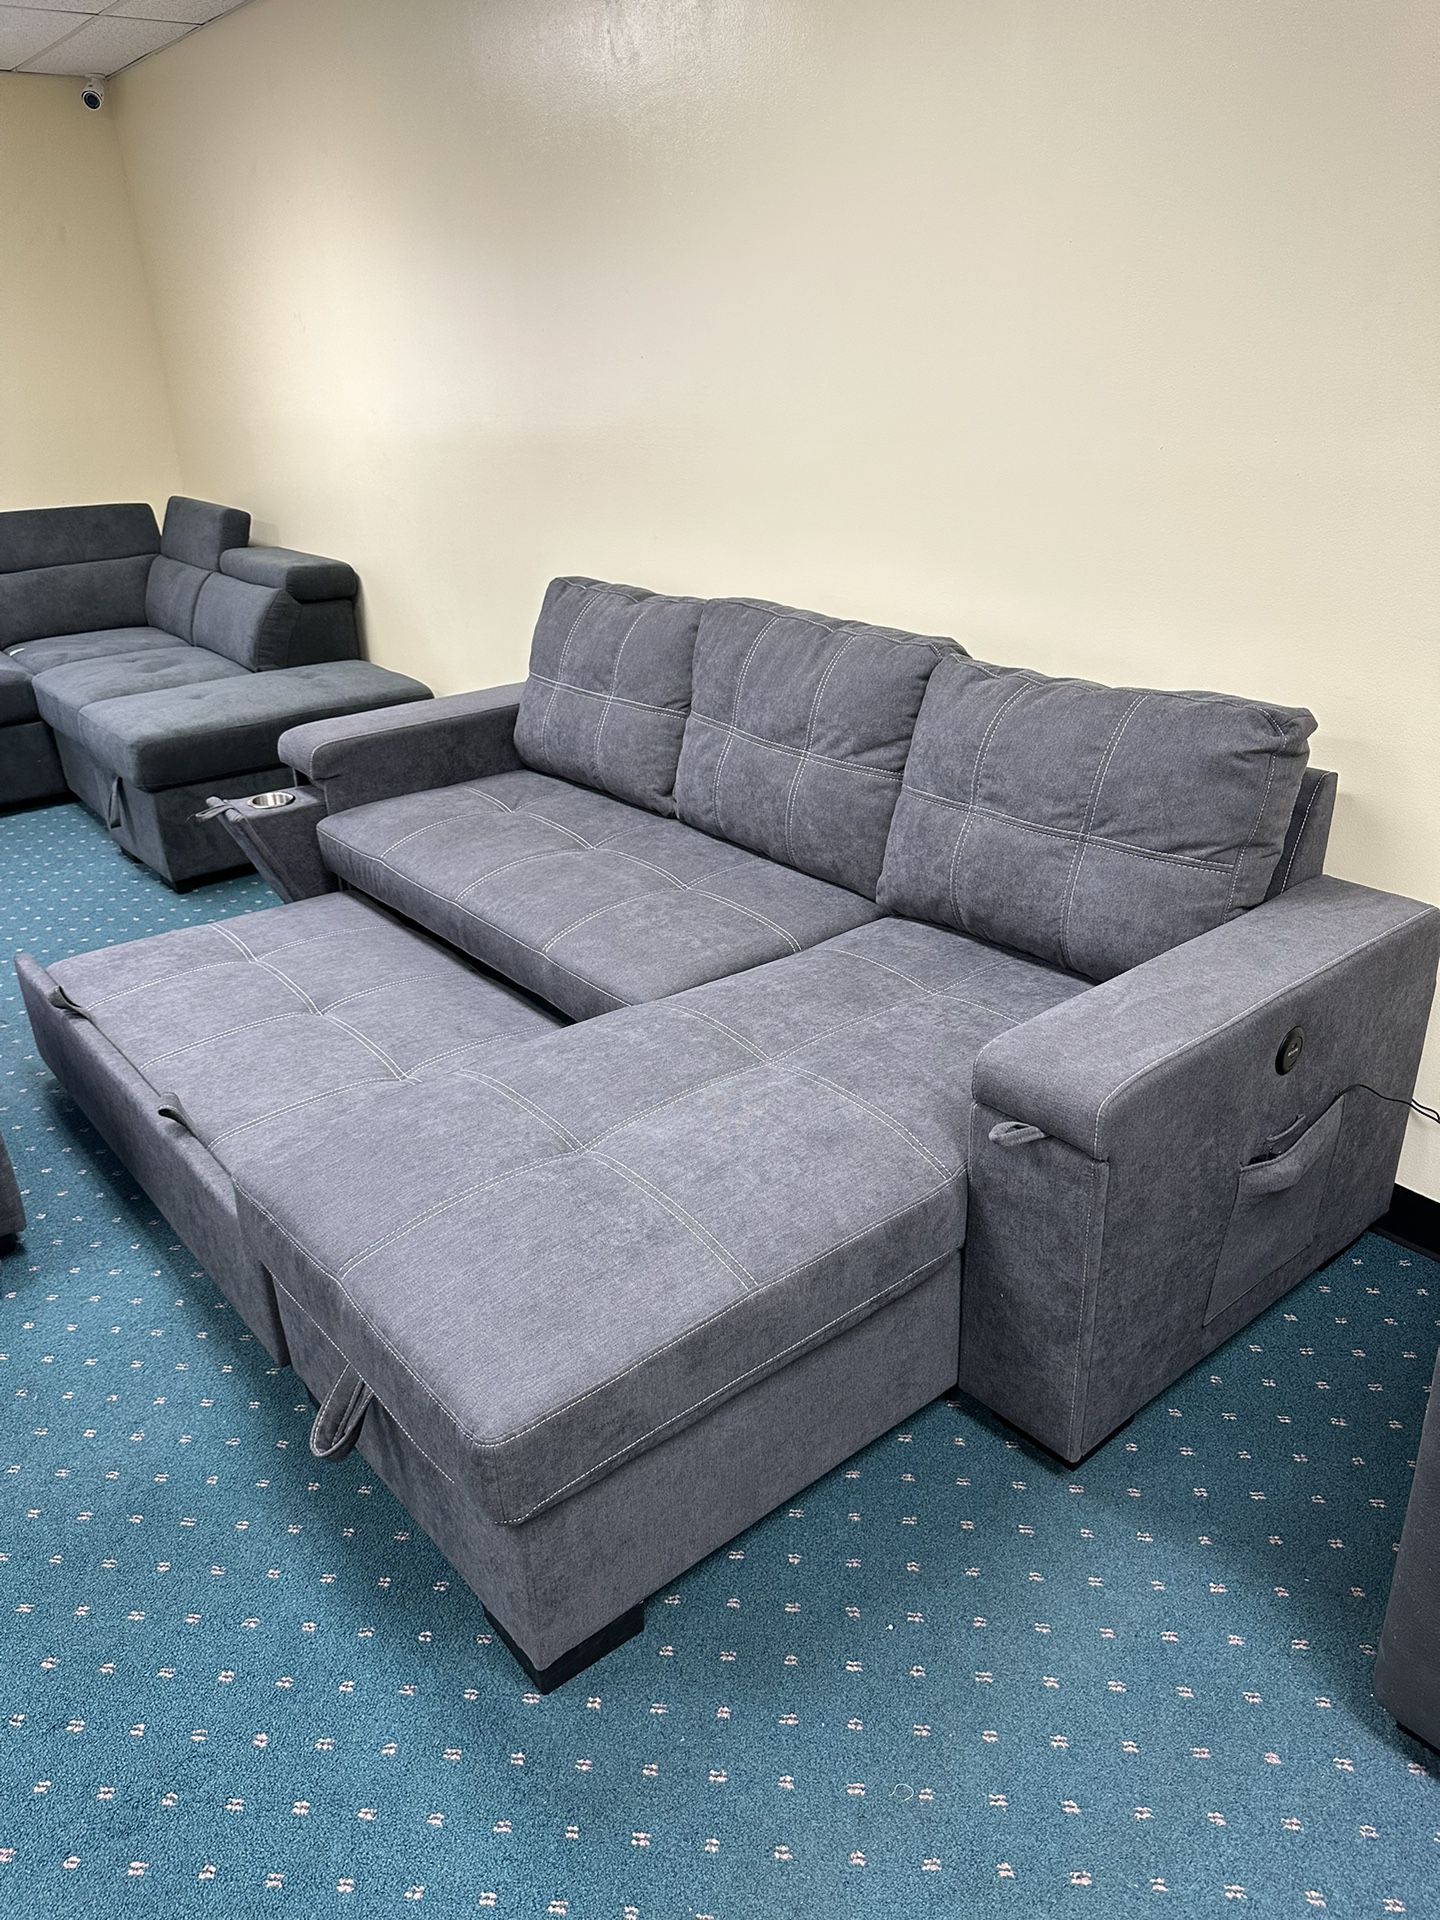 Brand new sectional in box- Flexible Payment options available $39 down. (Limited supply) 